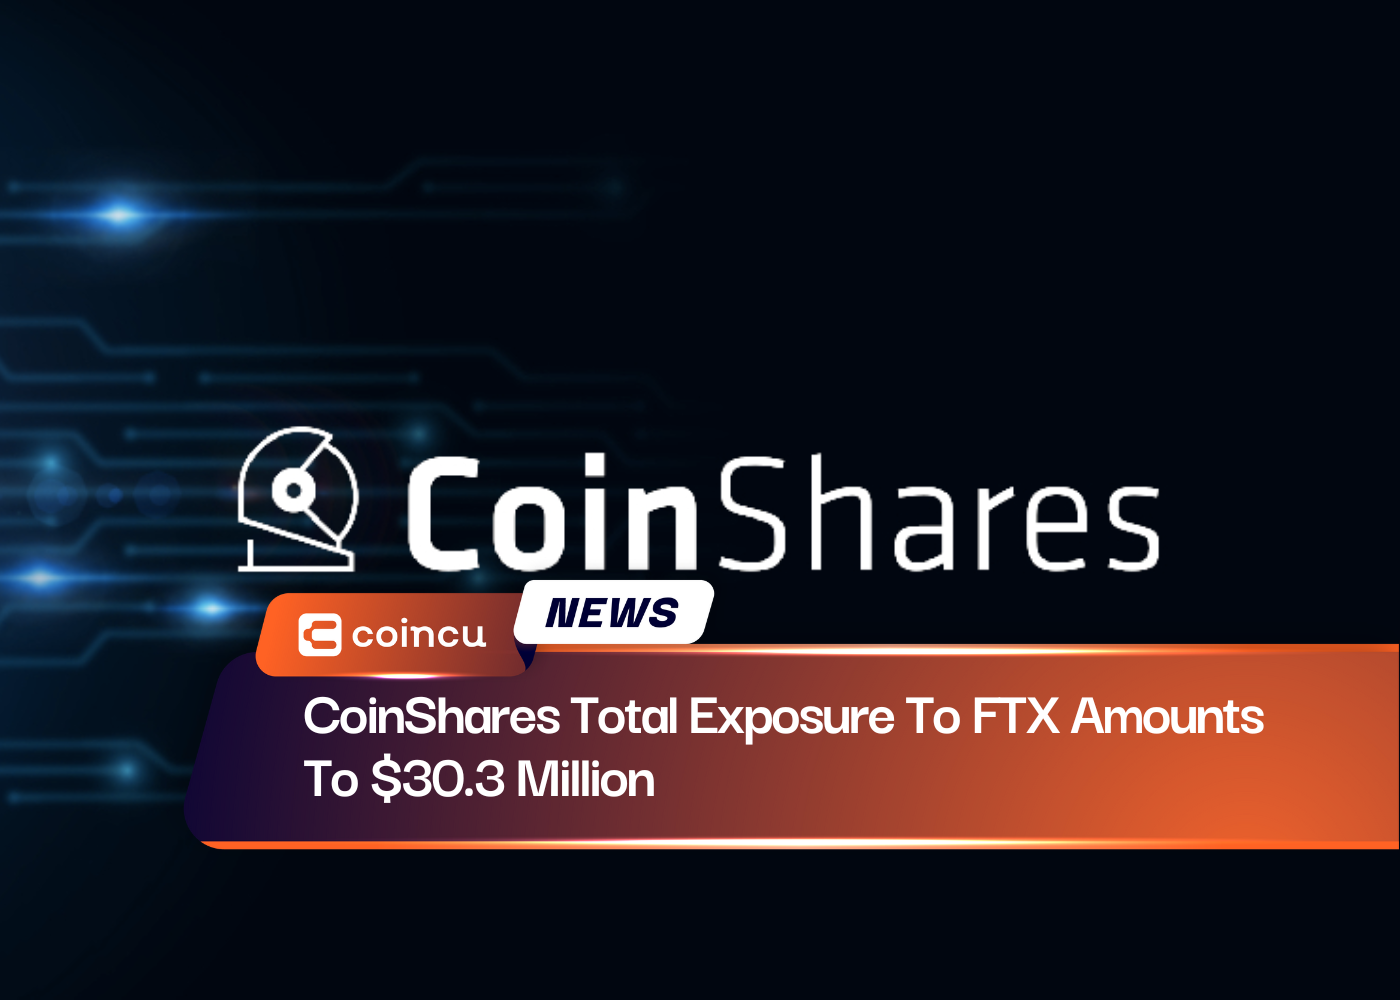 CoinShares Total Exposure To FTX Amounts To $30.3 Million